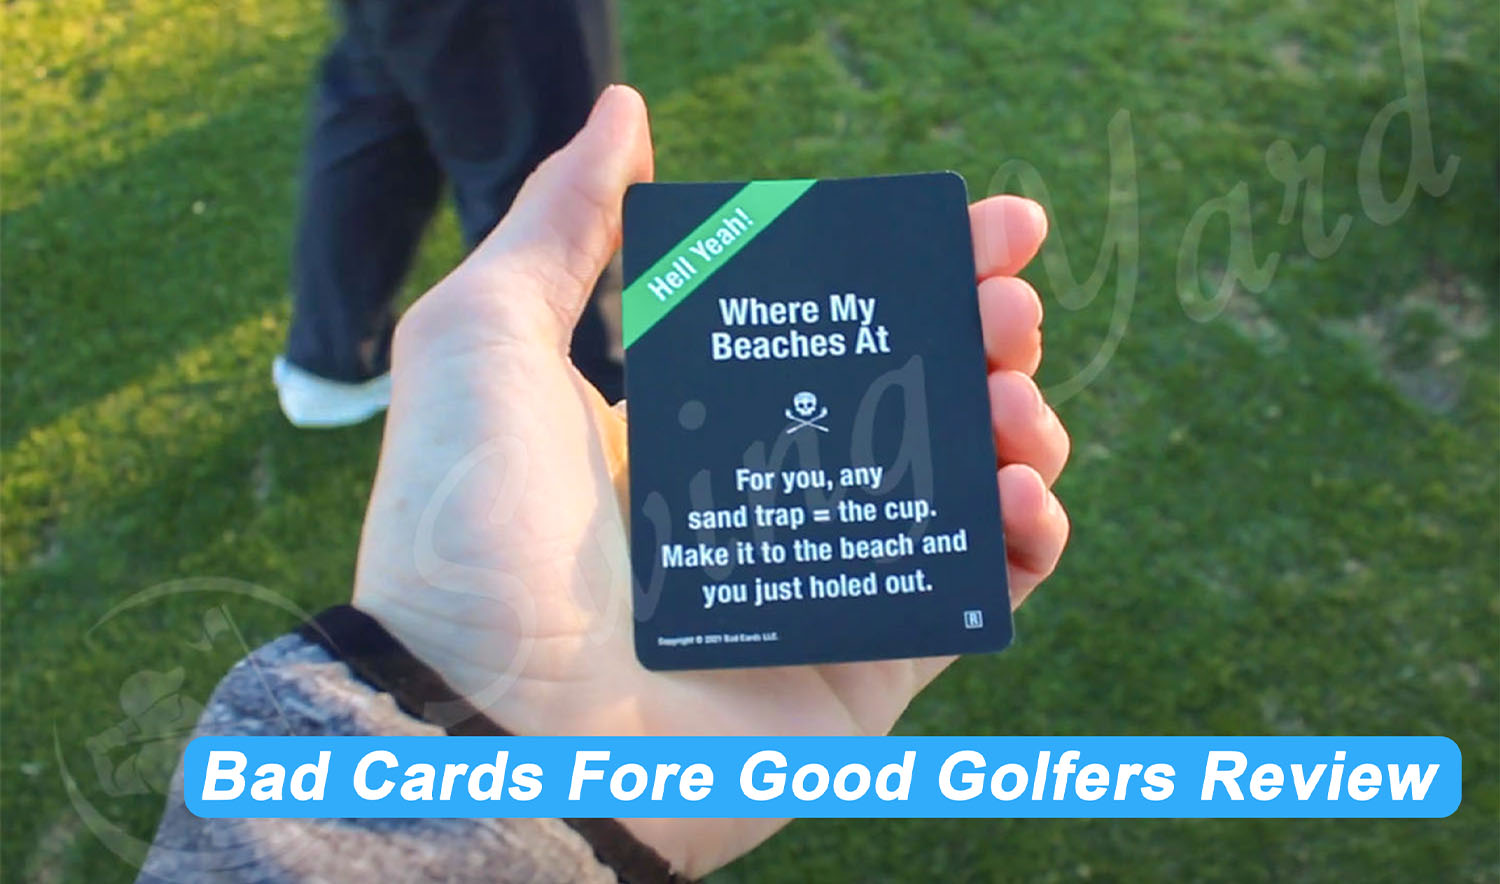 A green Bad Cards fore good golfers in my hand at the golf course